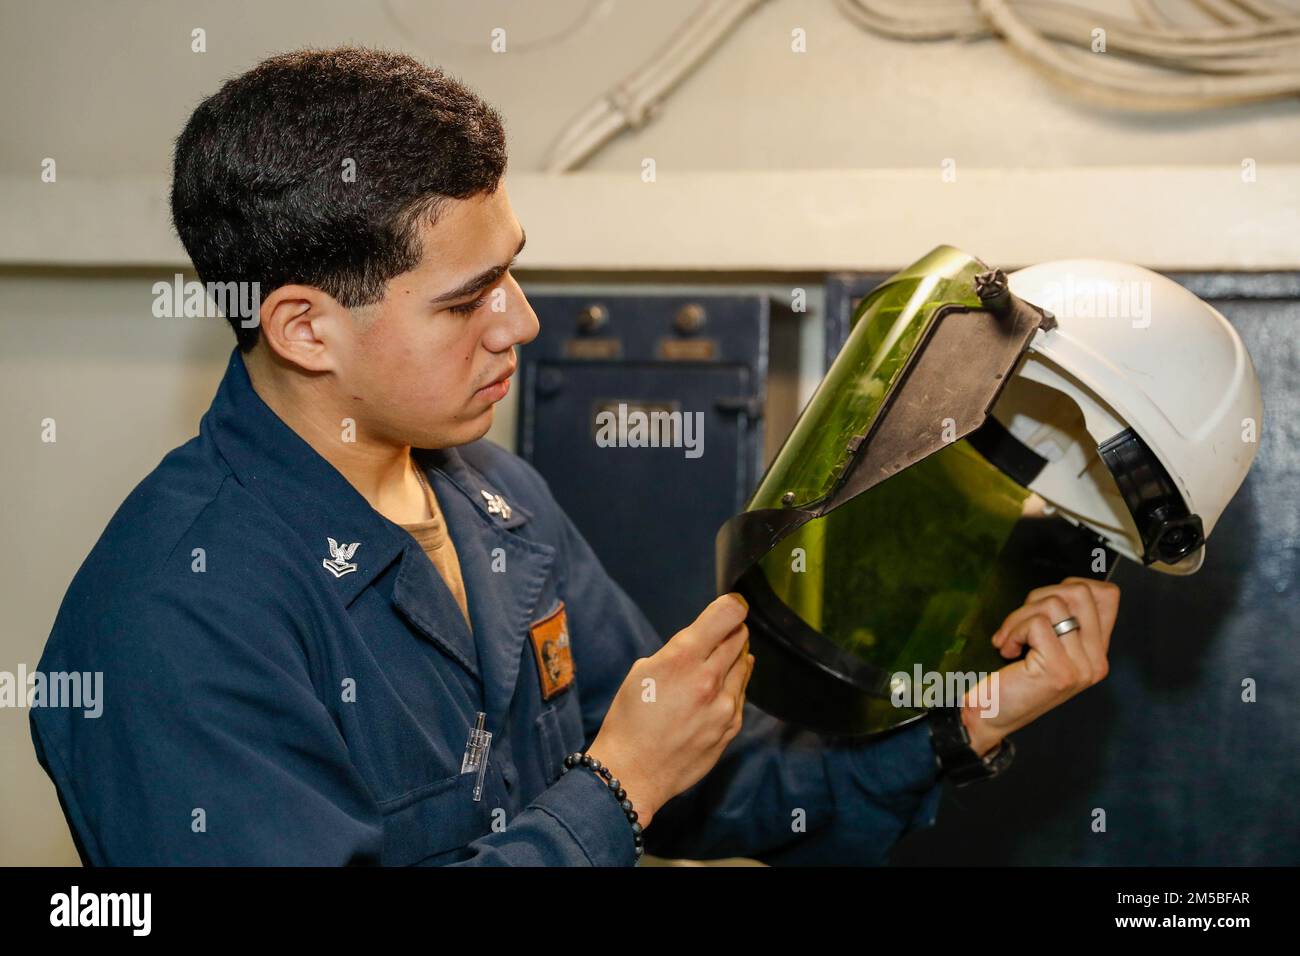 PHILIPPINE SEA (Feb. 22, 2022) Electrician’s Mate 2nd Class Erick Cobos, from Miami, inspects a face shield prior to initial voltage verification aboard the Nimitz-class aircraft carrier USS Abraham Lincoln (CVN 72). Abraham Lincoln Strike Group is on a scheduled deployment in the U.S. 7th Fleet area of operations to enhance interoperability through alliances and partnerships while serving as a ready-response force in support of a free and open Indo-Pacific region. Stock Photo